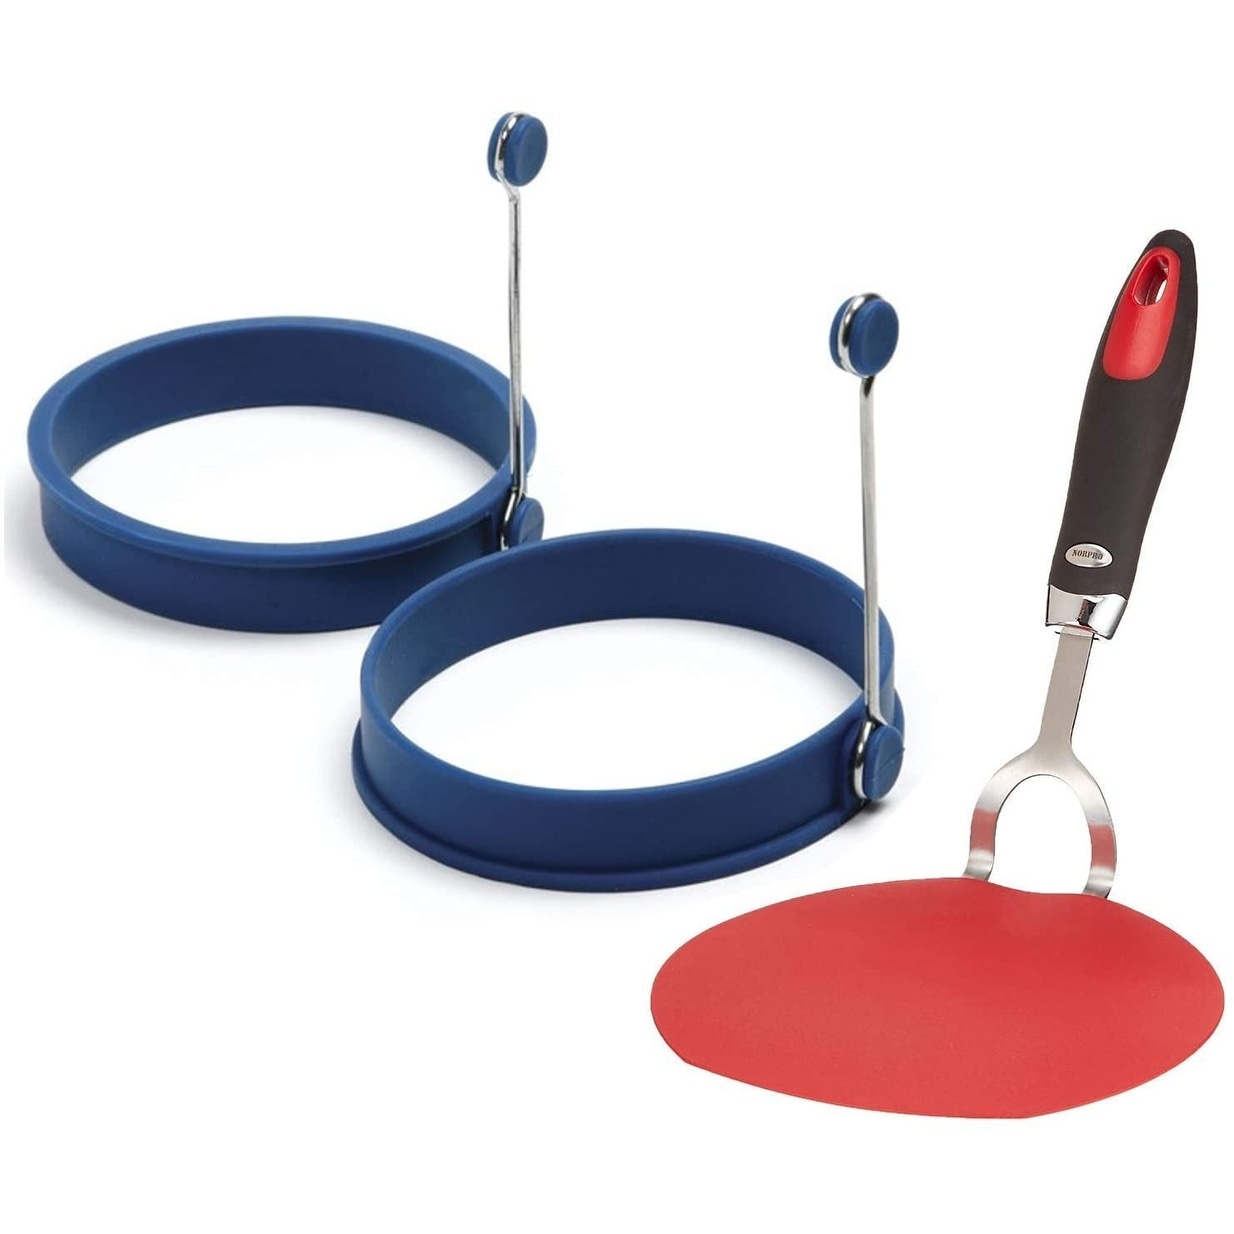 https://ak1.ostkcdn.com/images/products/is/images/direct/ac767a34acf97d148217f320cc60ed4843c70a75/Norpro-Grip-EZ-Flexible-Pancake-Spatula-with-Silicone-Round-Pancake-Egg-Rings-Combo.jpg